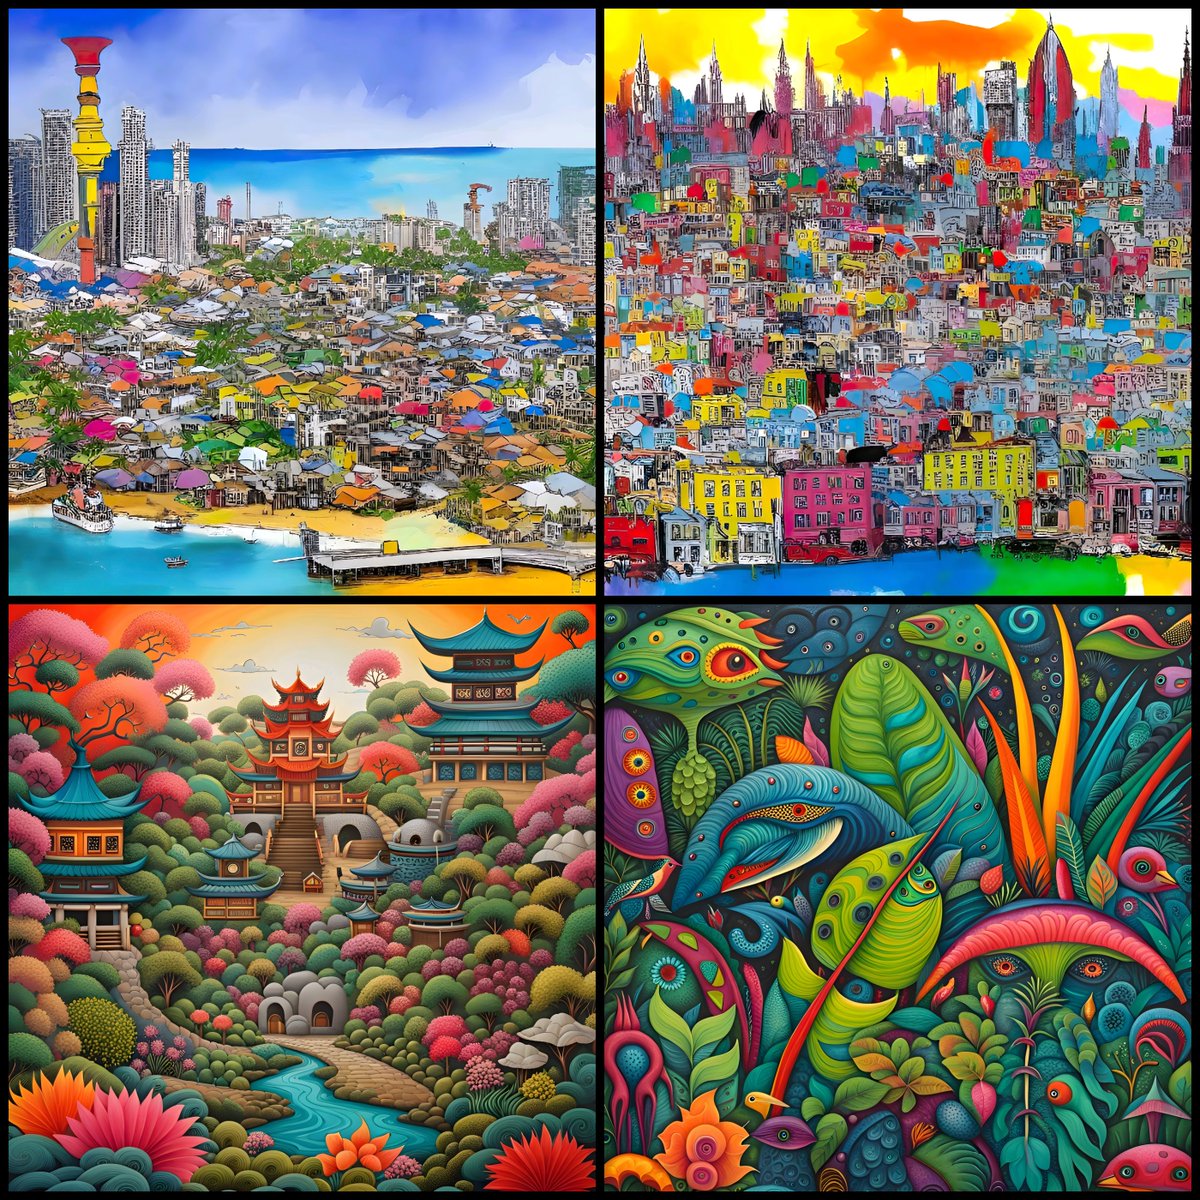 🌞Have a wonderful weekend my awesome friends
🎨4 brand-new Open Editions @objktcom 
🌇Male🇲🇻
🏙️Dublin🇮🇪
💙Heaven on Earth
💚Jungle
❤️Prices 1.25-2 $XTZ
🔽Links in comments

#NFTs #TezosNFTs #nftcollectors